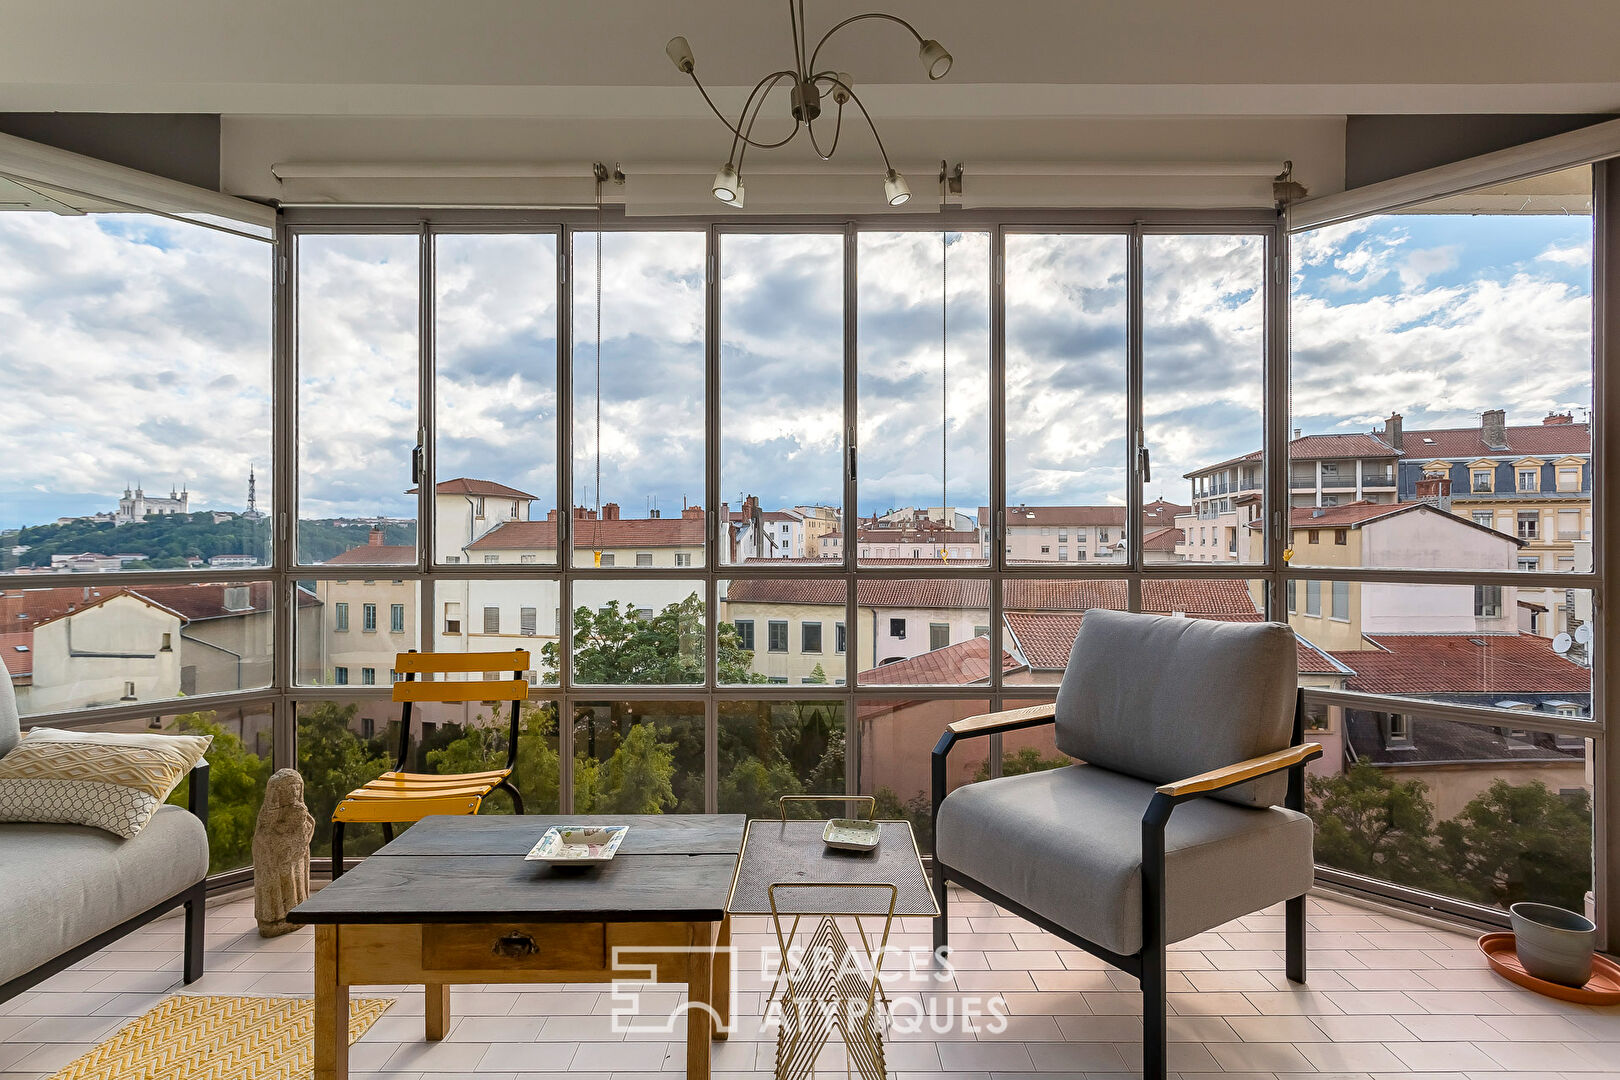 Apartment with terraces and view of the Croix-Rousse plateau